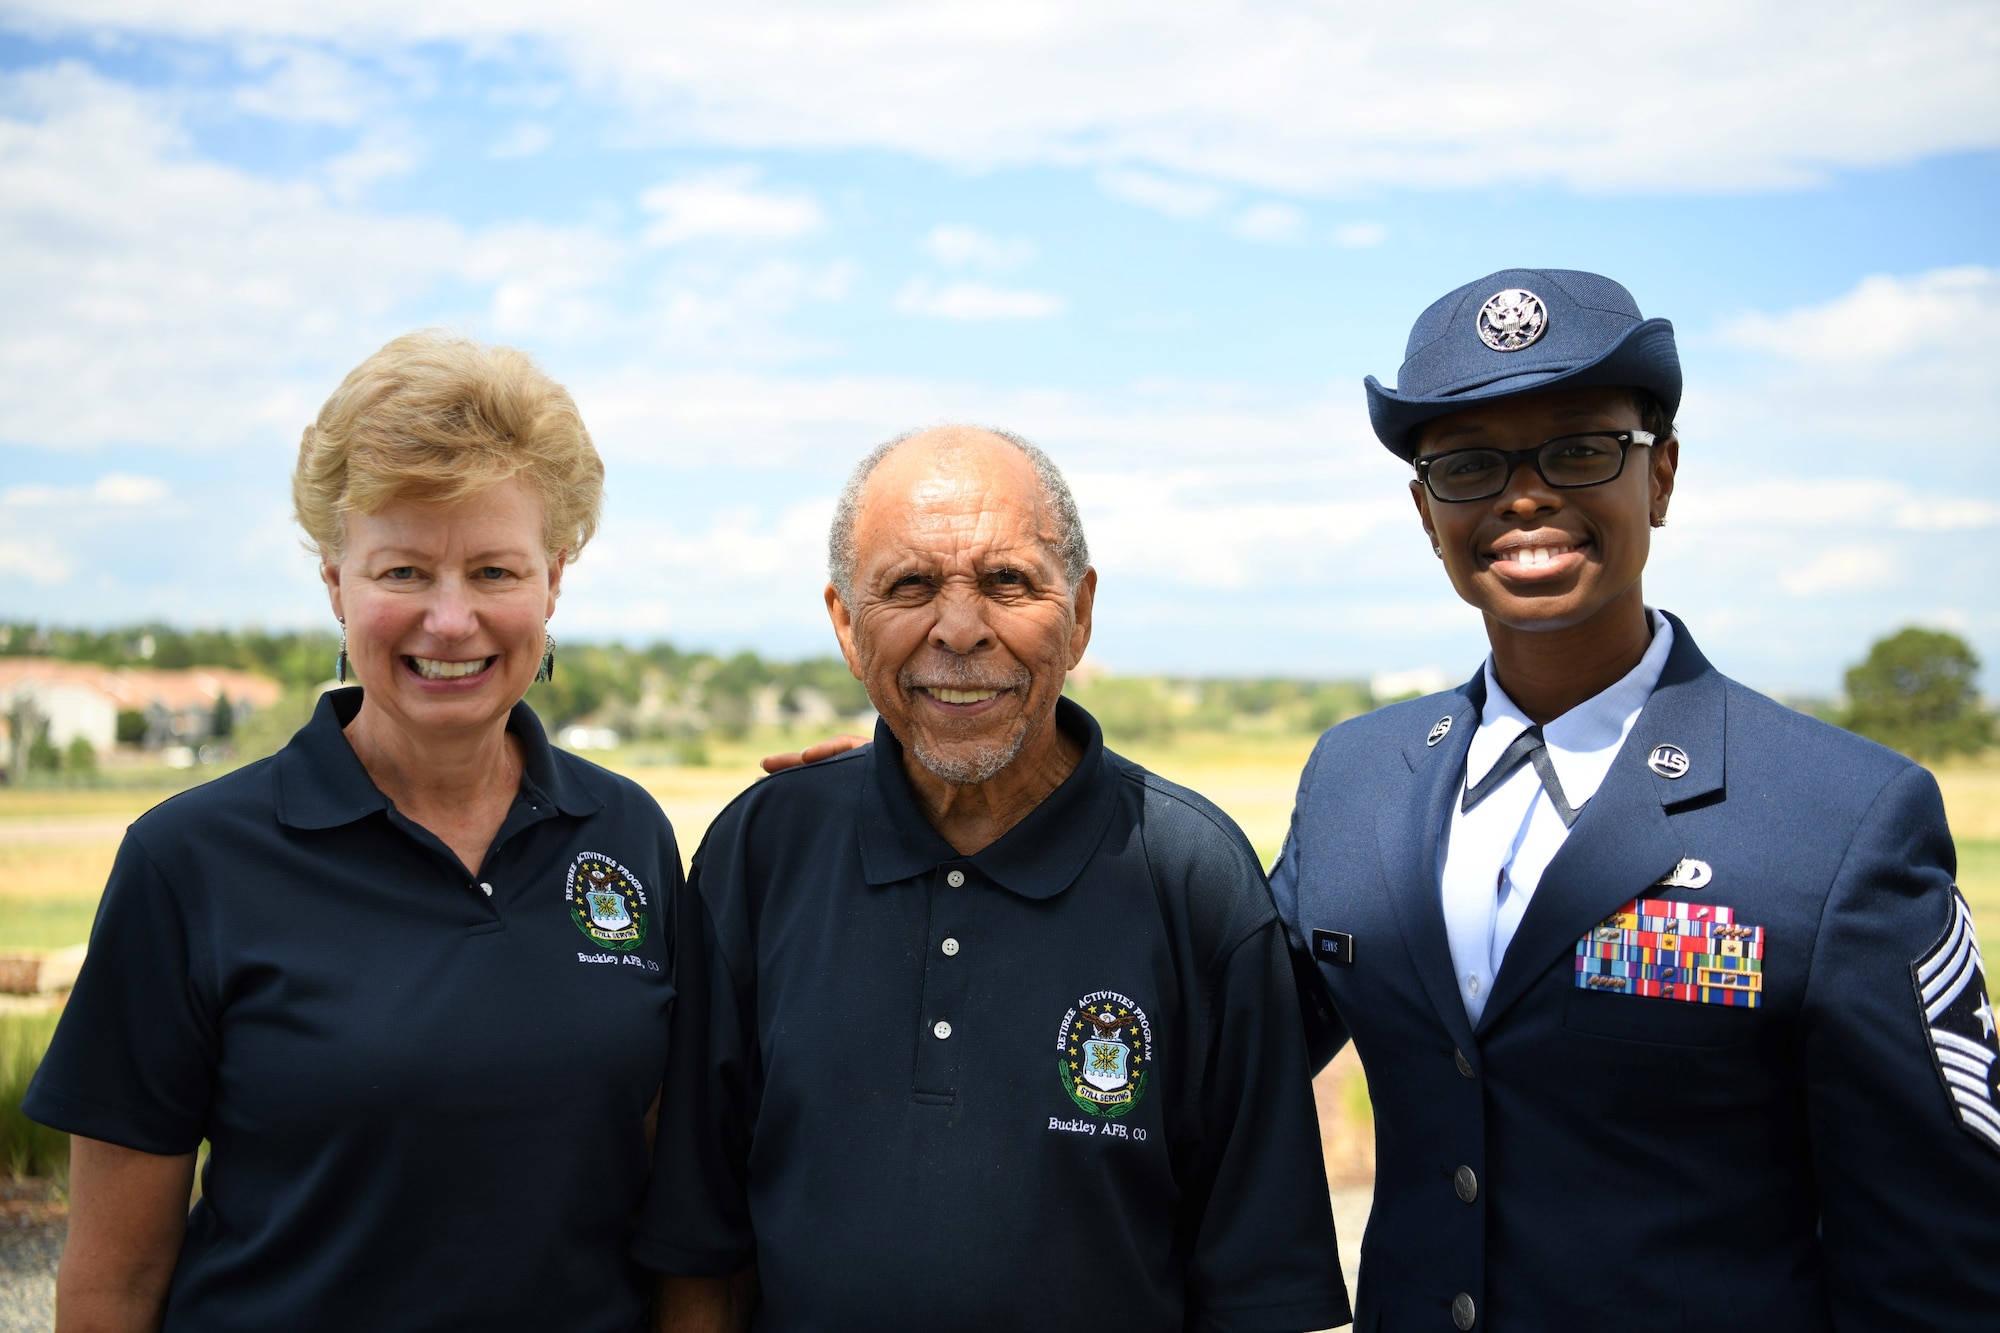 Chief Master Sergeant Tamar Dennis, 460th Space Wing command chief, meets with volunteers from the Retiree Activities Office July 27, 2019, on Buckley Air Force Base, Colo.  The RAO hosted Retiree Appreciation Day, giving attendees free food and educating retirees on the free resources available for all their needs and benefits. (U.S. Air Force photo by Airman 1st Class Michael D. Mathews)